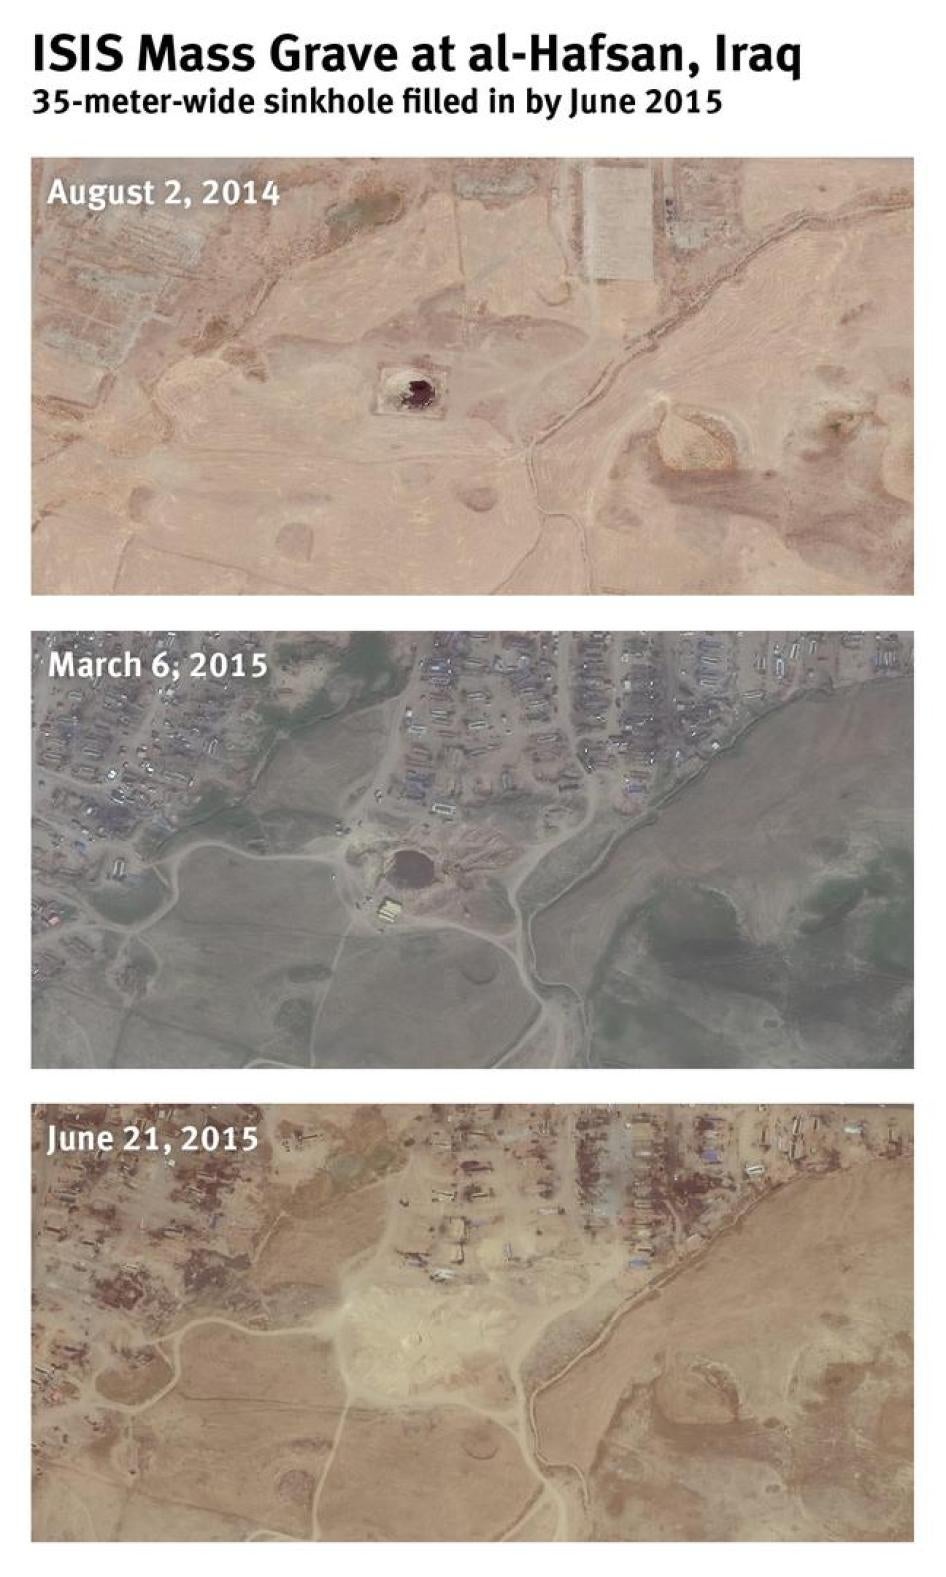 Satellite imagery showing the Khafsa sinkhole being filled in by June 2015.